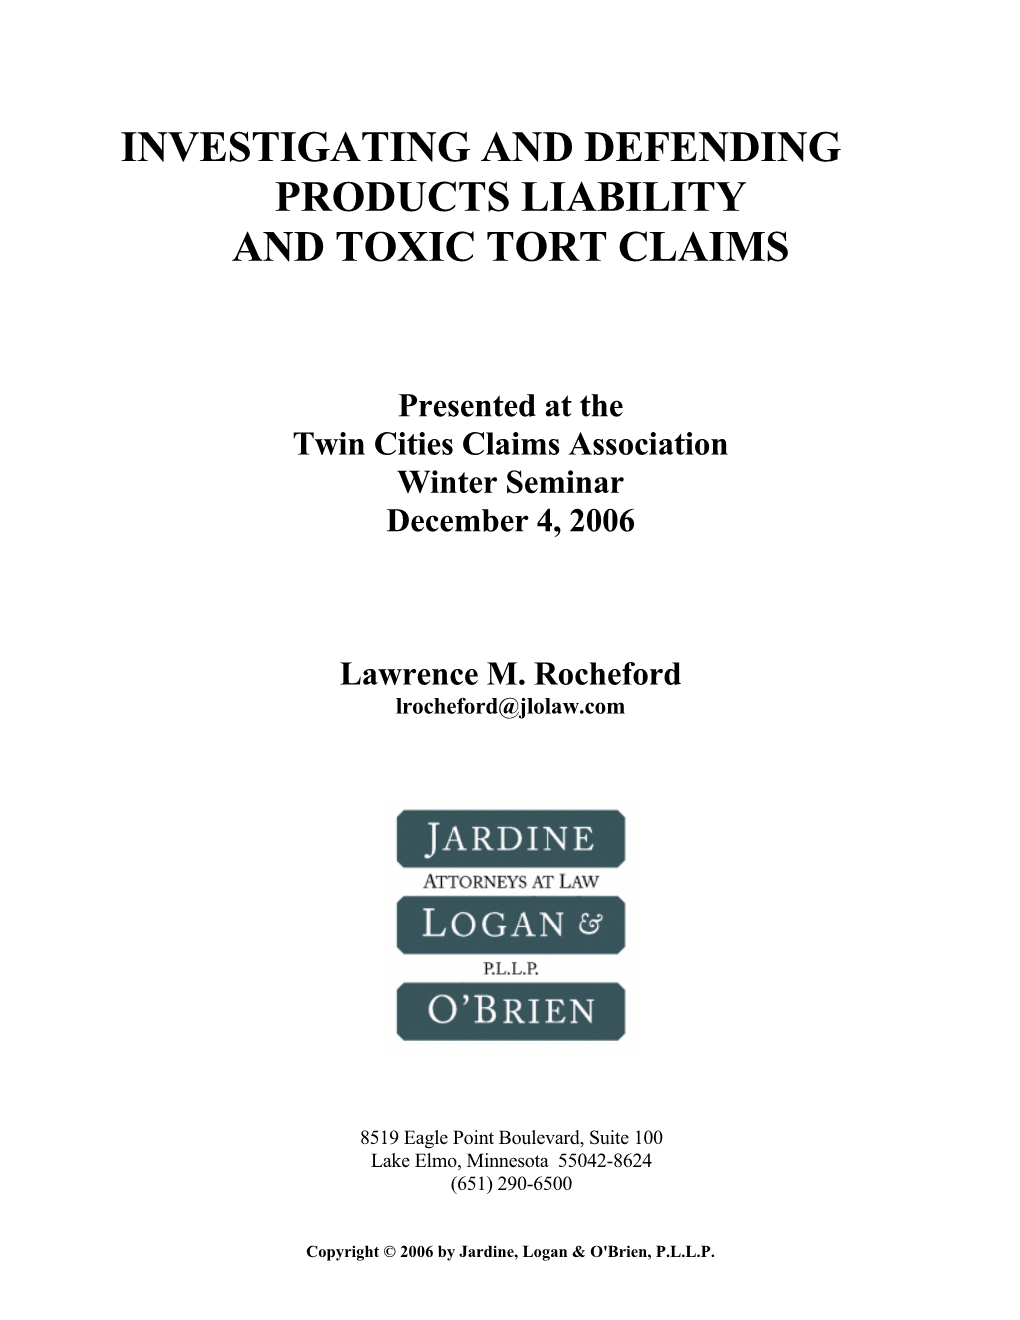 Investigating and Defending Products Liability and Toxic Tort Claims